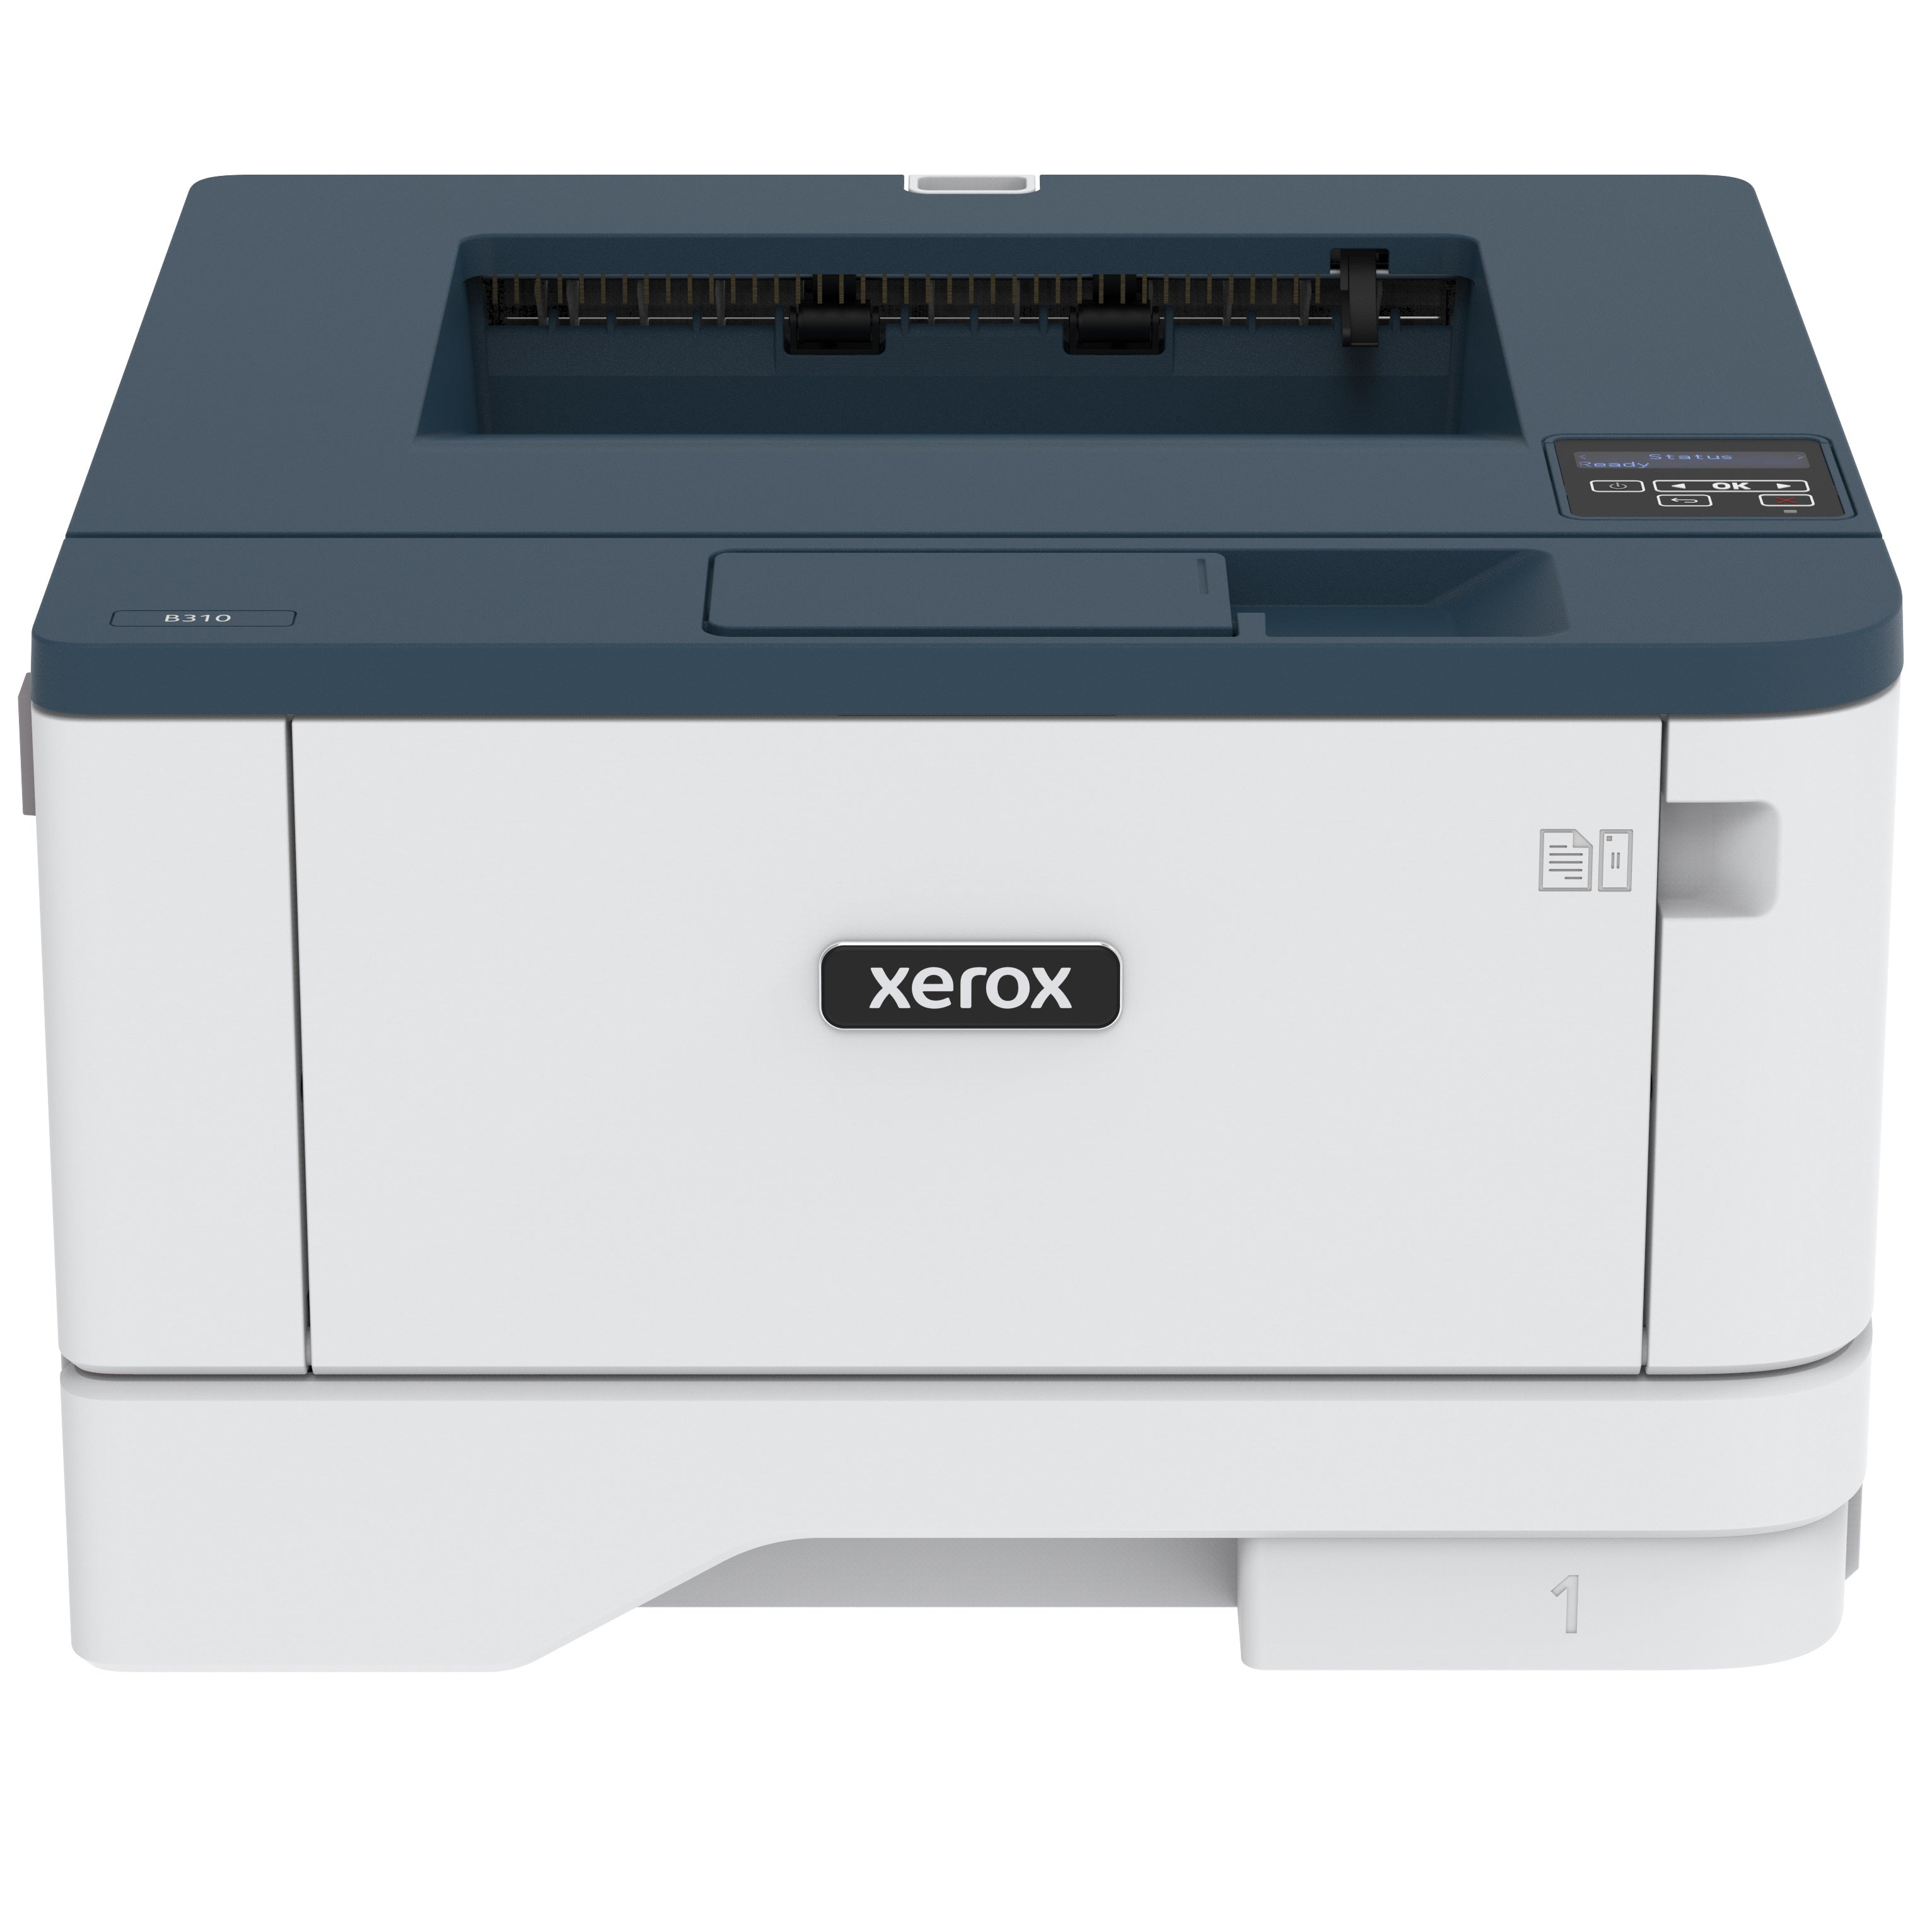 Xerox B310/DNI - Monochrome Laser Printer, Up to 42 Pages/Minute, 250 Sheets Capacity, Hi-Speed Network Connectivity, Connect Home/Company With Wi-Fi